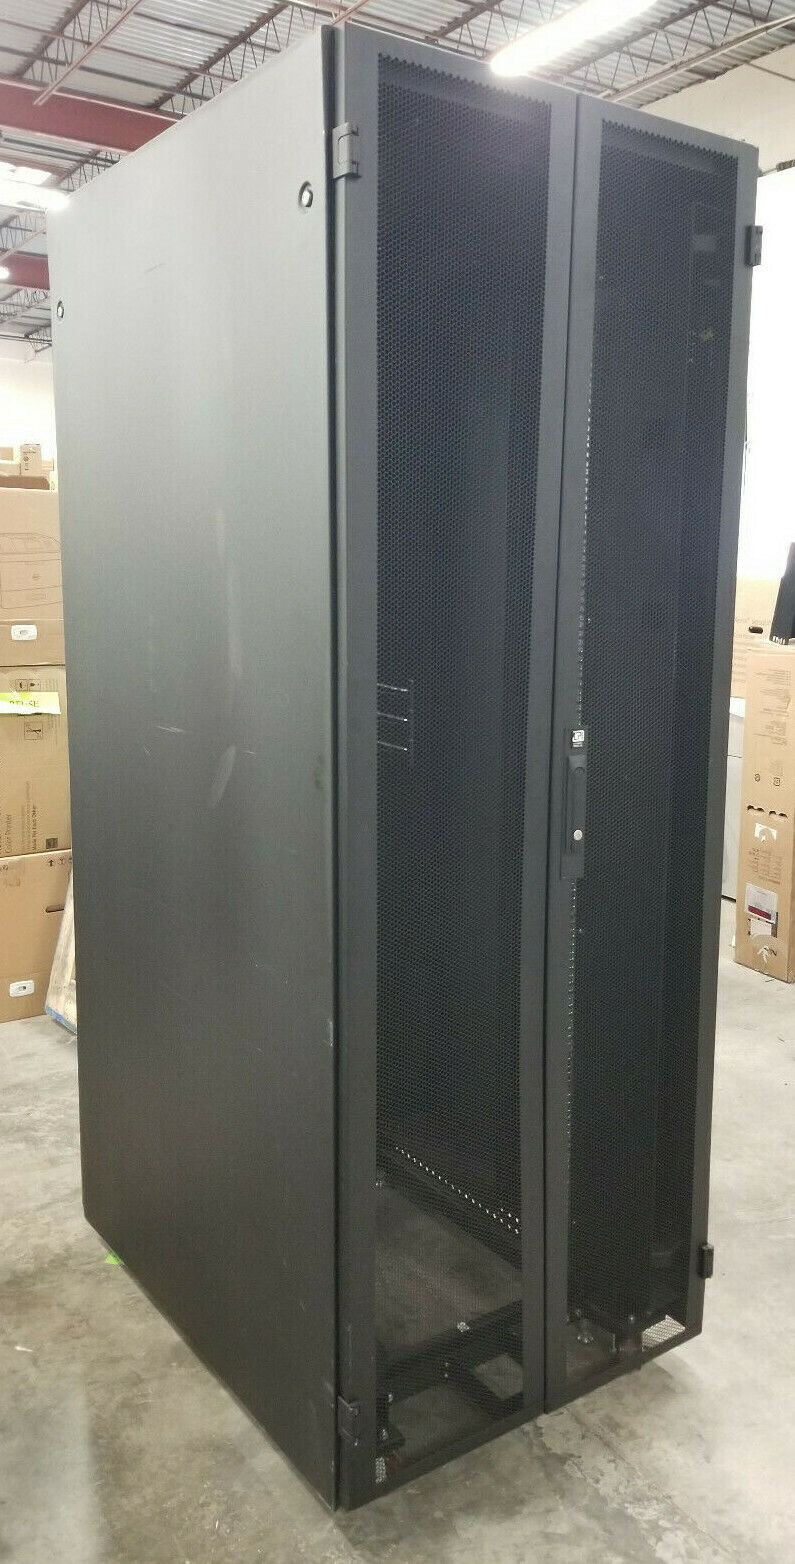 CHATSWORTH PRODUCTS 45u Server Rack with Doors & Side Panels LOCAL PICKUP ONLY